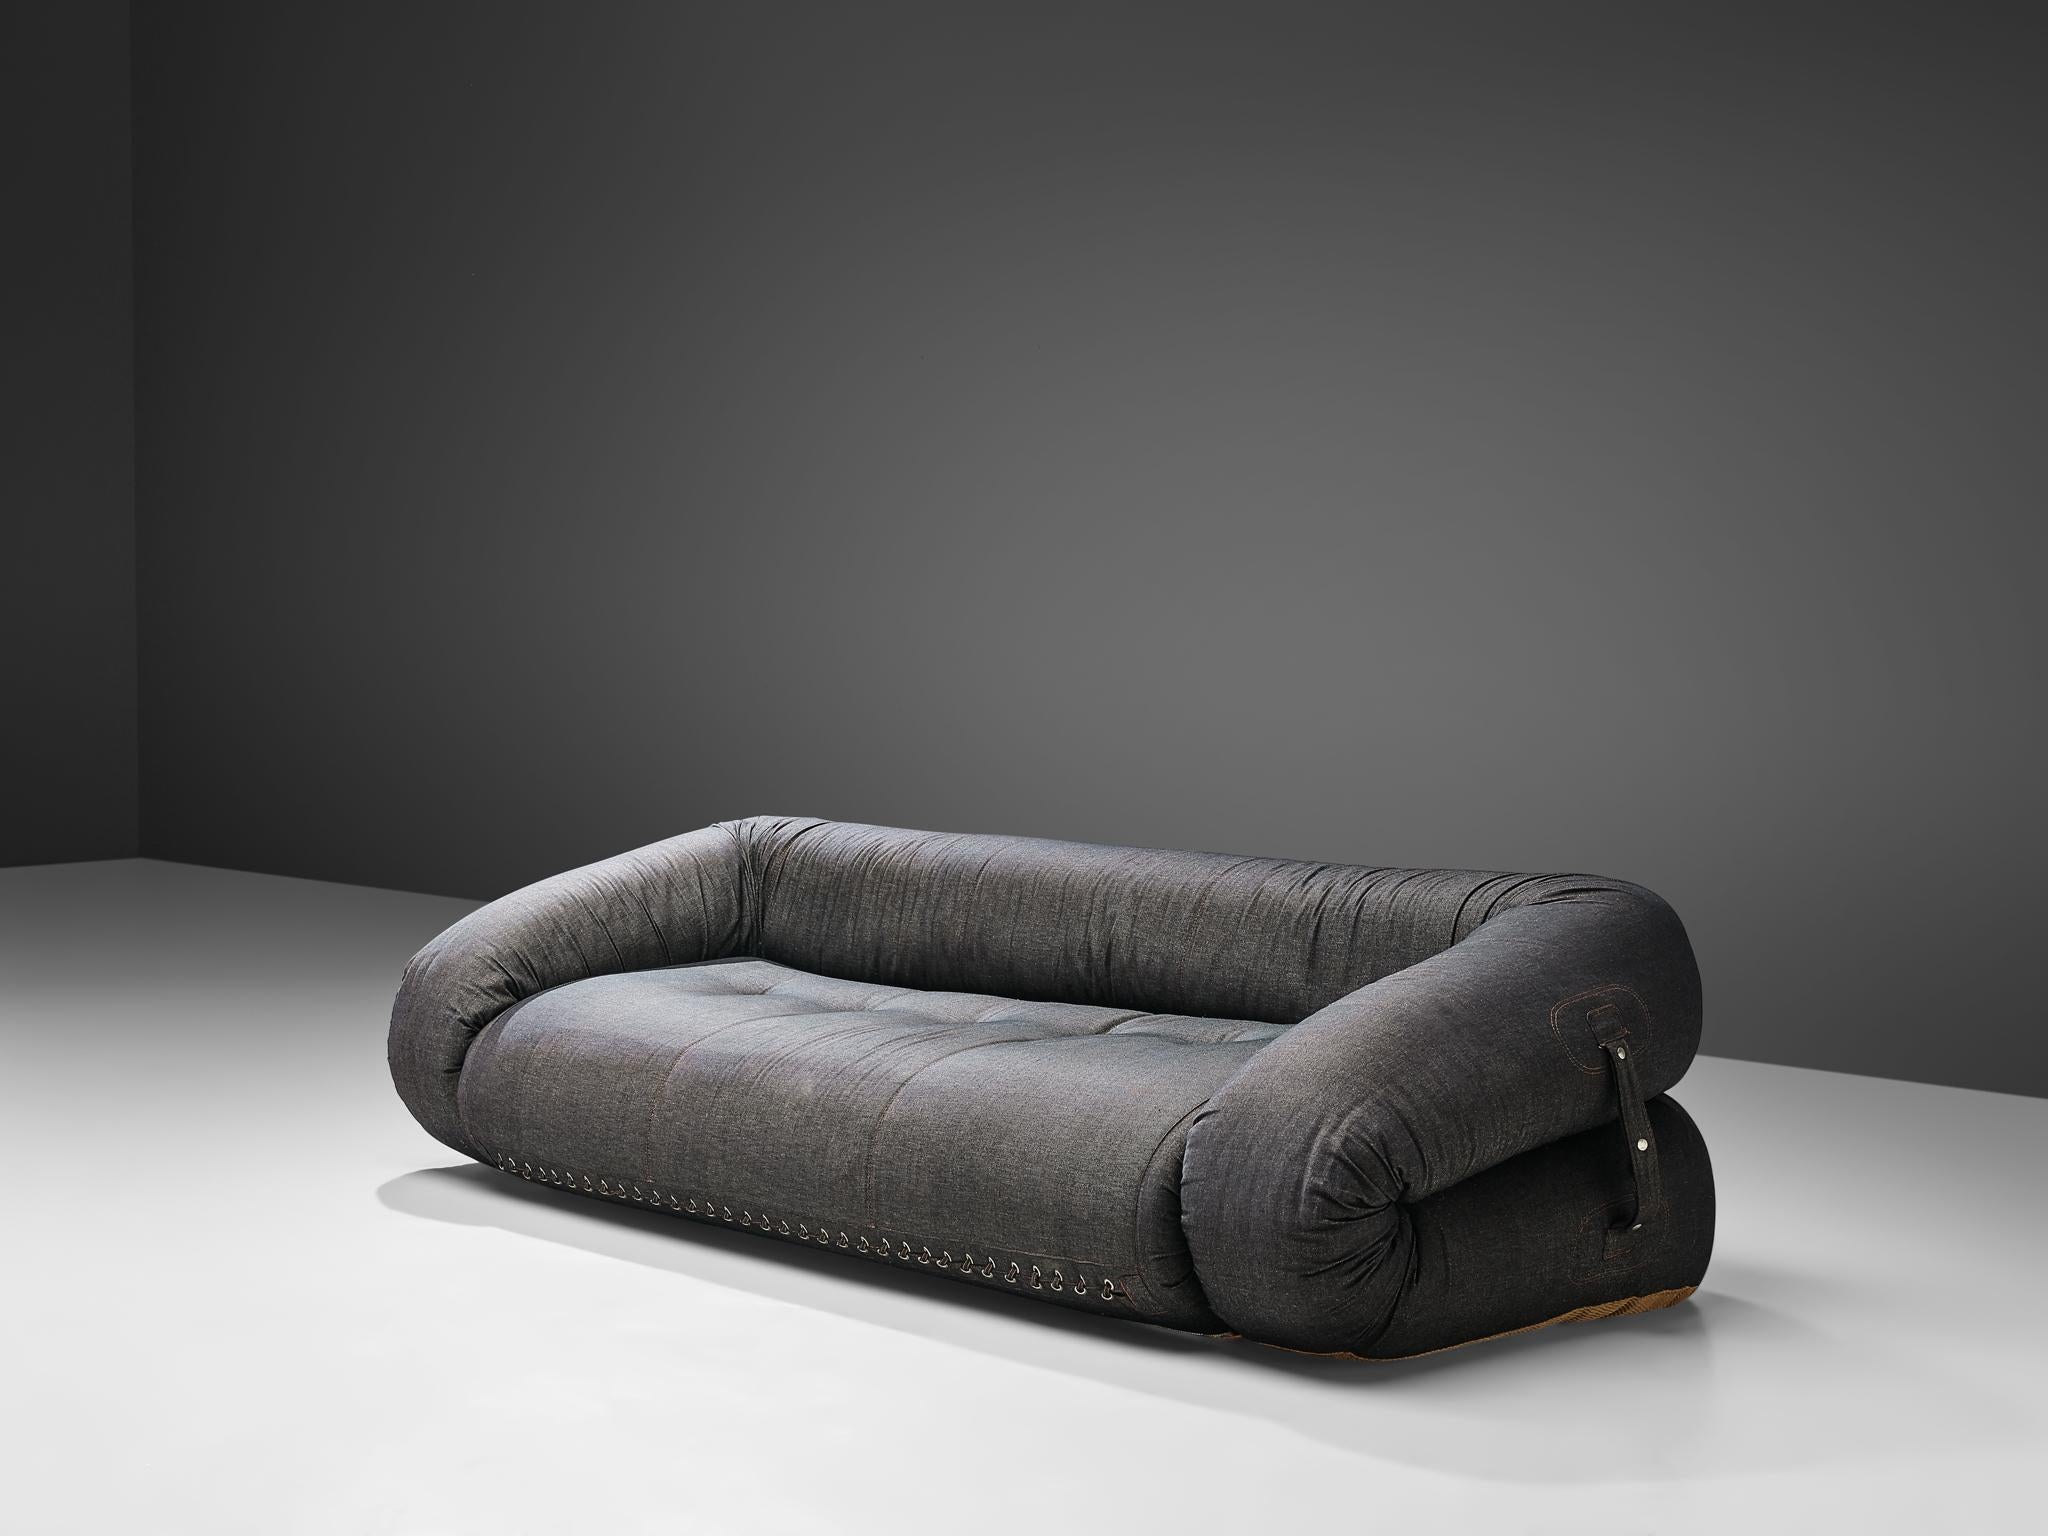 Alessandro Becchi for Giovannetti, 'Anfibio' sofa bed, denim upholstery, Italy, 1970s.

This Anfibio sofa was designed by Alessandro Becchi for Giovannetti in the 1970s. This convertible Italian sofa is upholstered with a dark blue denim fabric.